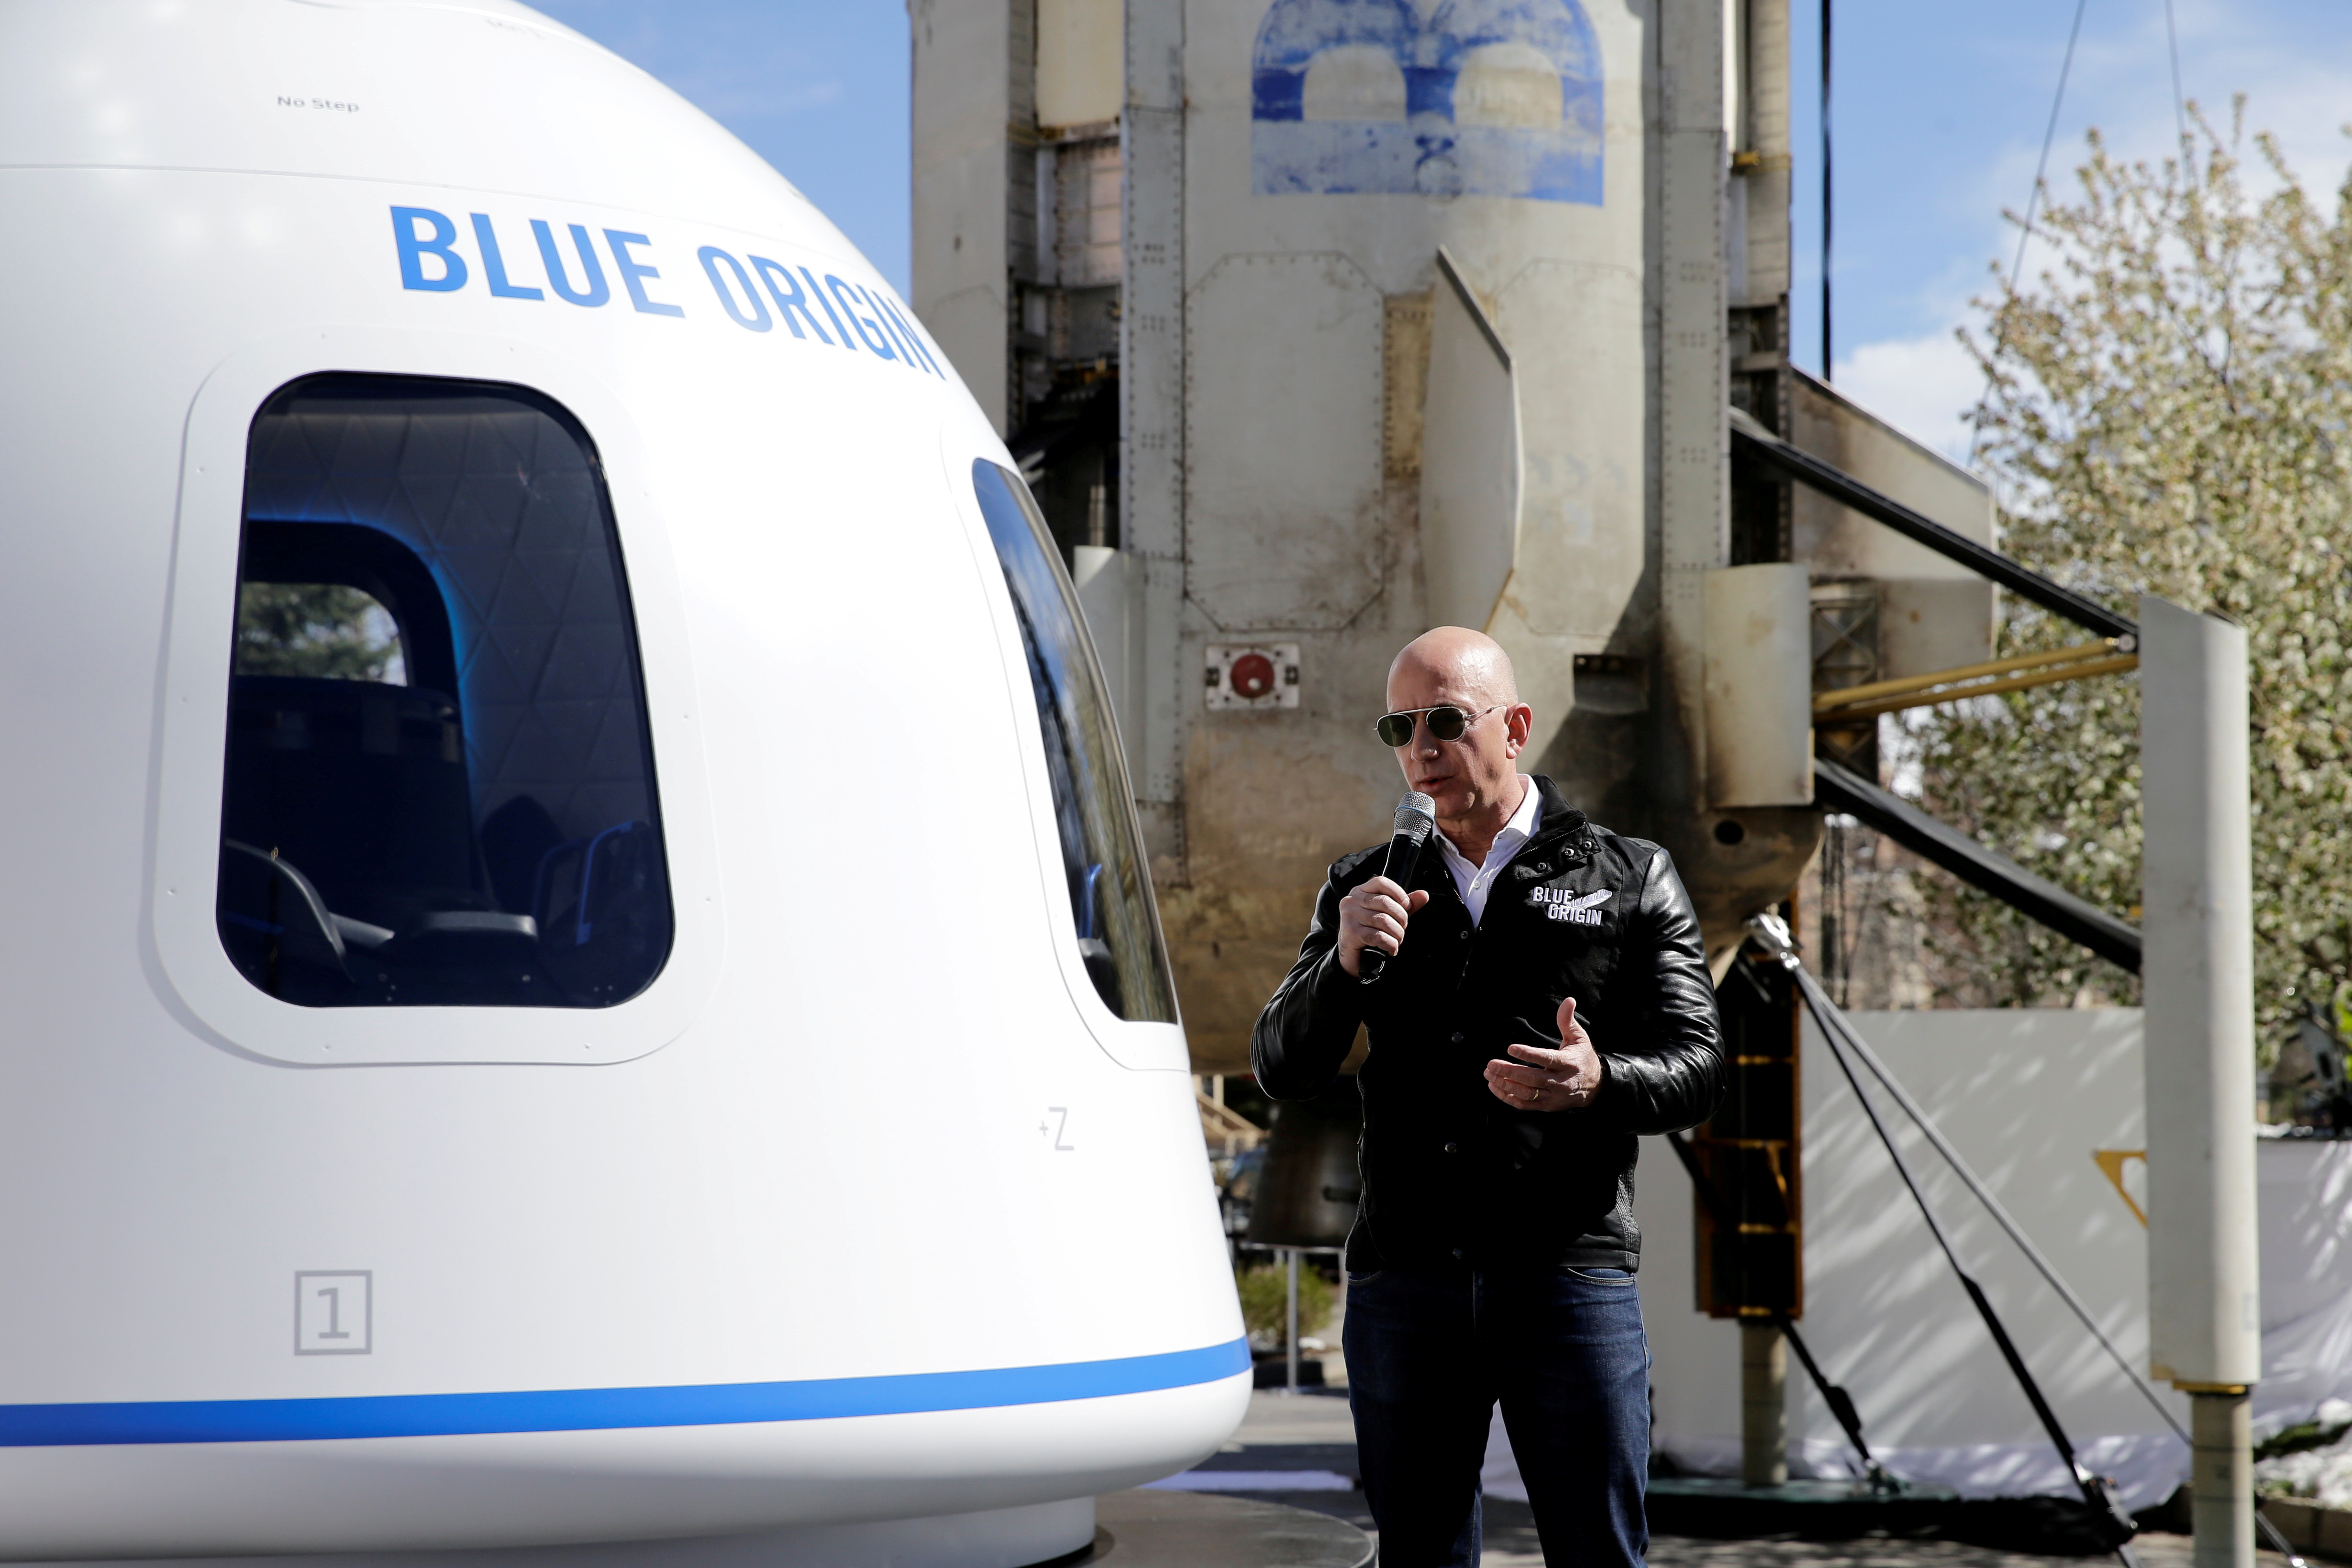 Amazon and Blue Origin founder Jeff Bezos addresses the media about the New Shepard rocket booster and Crew Capsule mockup at the 33rd Space Symposium in Colorado Springs, Colorado, United States April 5, 2017.  REUTERS/Isaiah J. Downing/File Photo